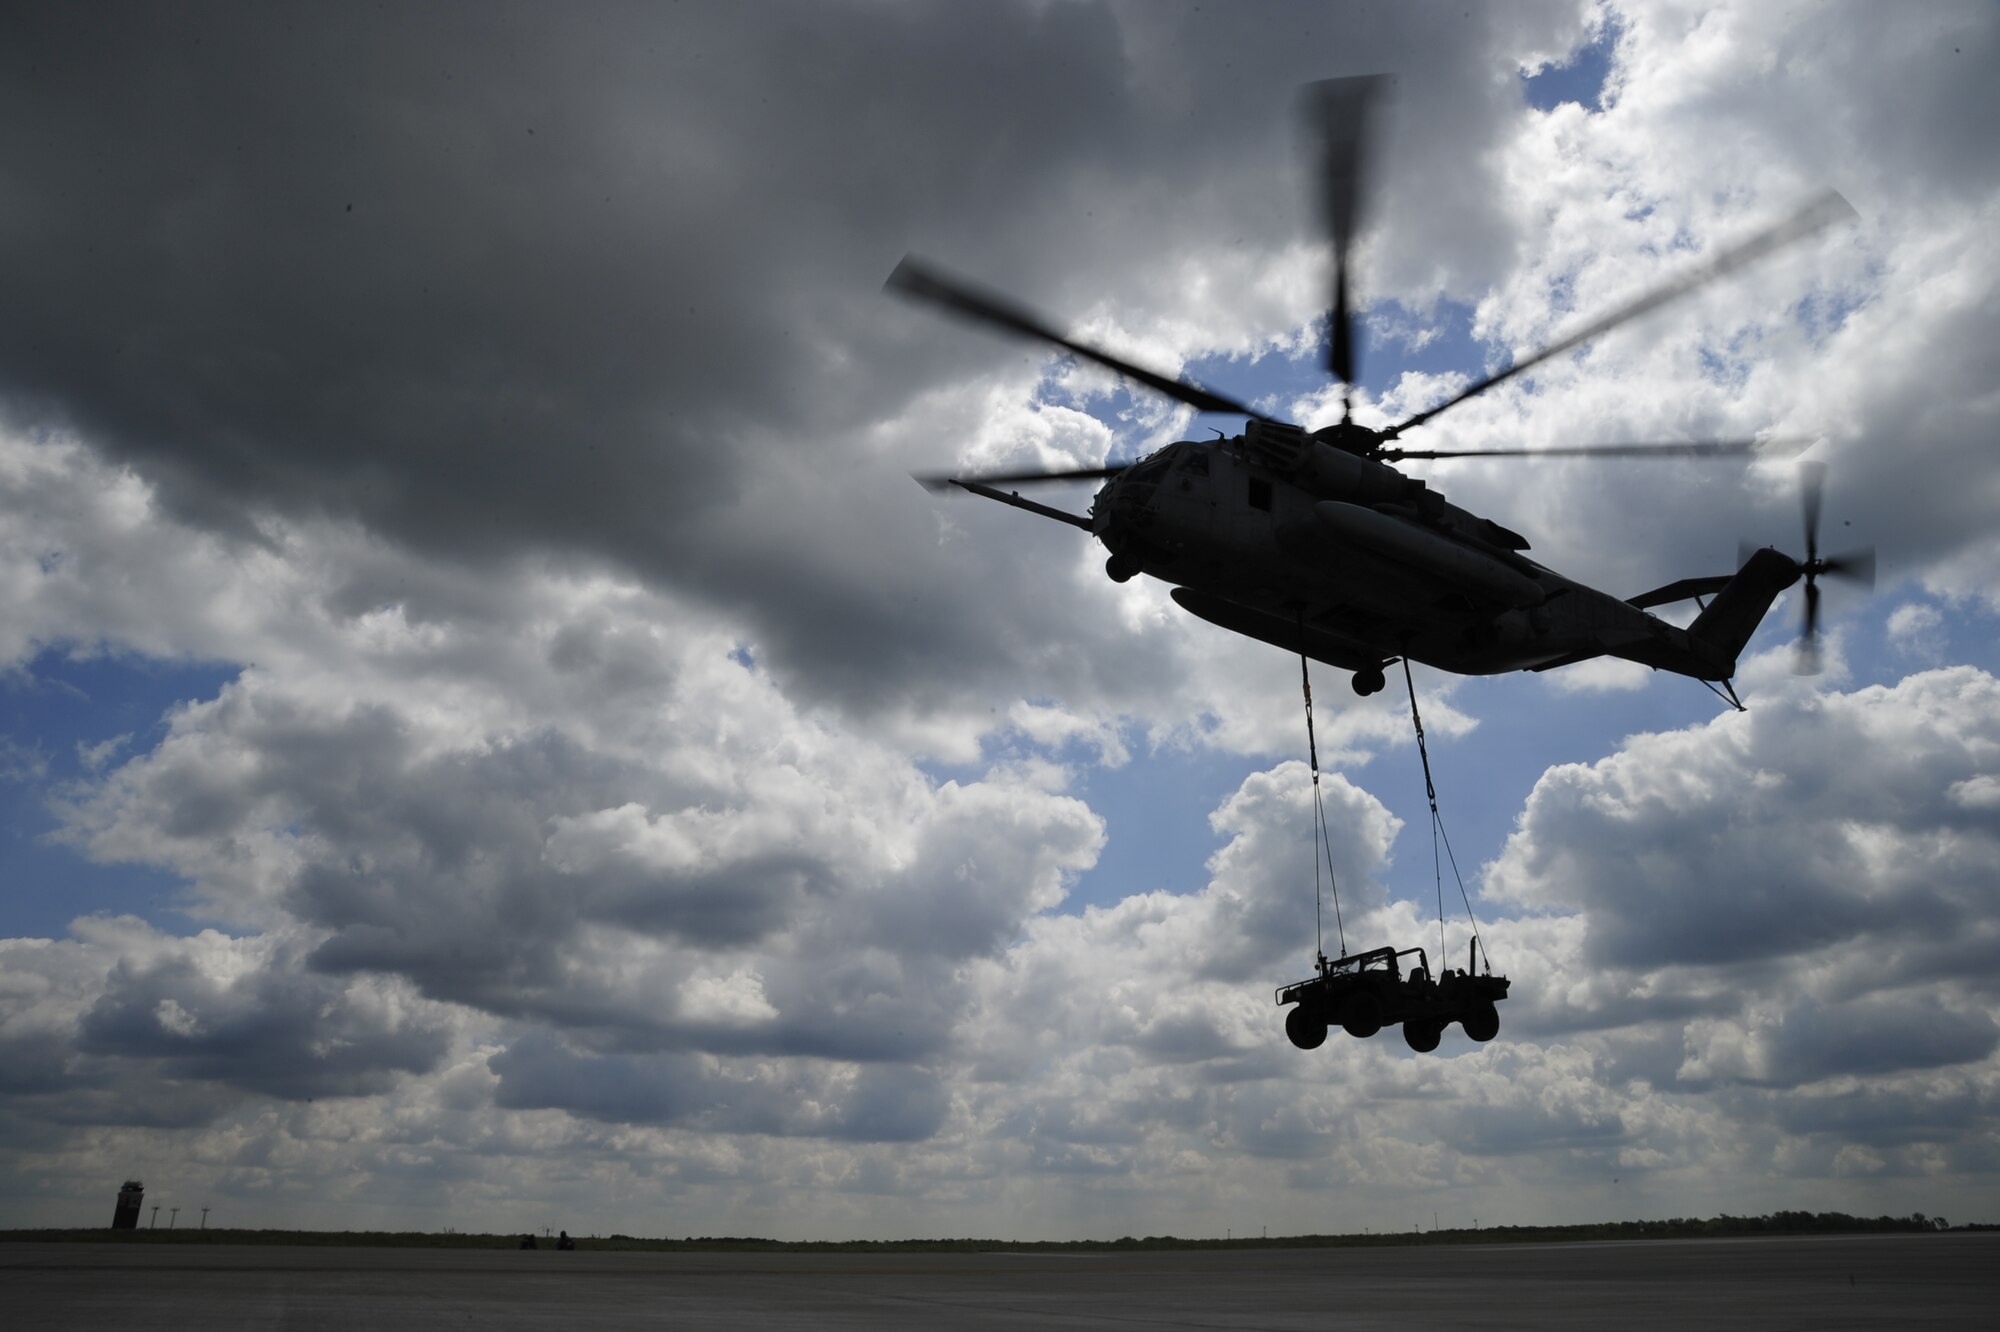 A U.S. Marine Corps CH-53E Super Stallion from Marine Heavy Helicopter Squadron 772 conducts slingload operations with Airmen from the 621st Contingency Response Wing at Joint Base McGuire-Dix-Lakehurst, N.J., May 10. Both units were preparing for a Marine airpower demonstration at the 2012 JB MDL Open House and & Air Show, scheduled for May 12 and 13.  (U.S. Air Force photo by Tech. Sgt. Parker Gyokeres)